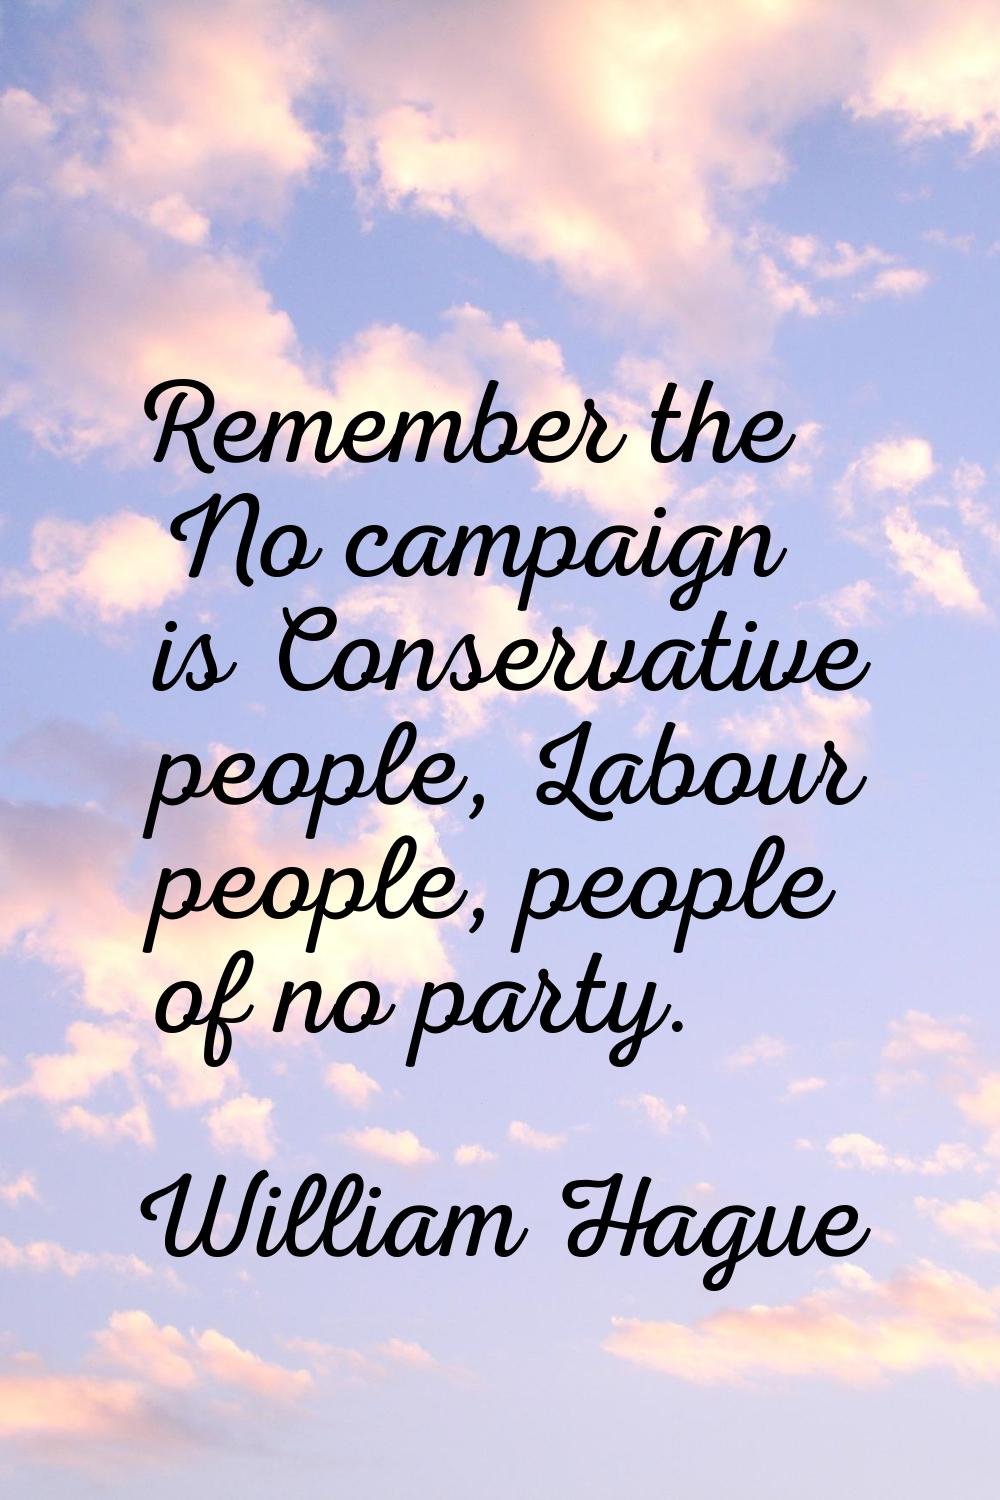 Remember the No campaign is Conservative people, Labour people, people of no party.